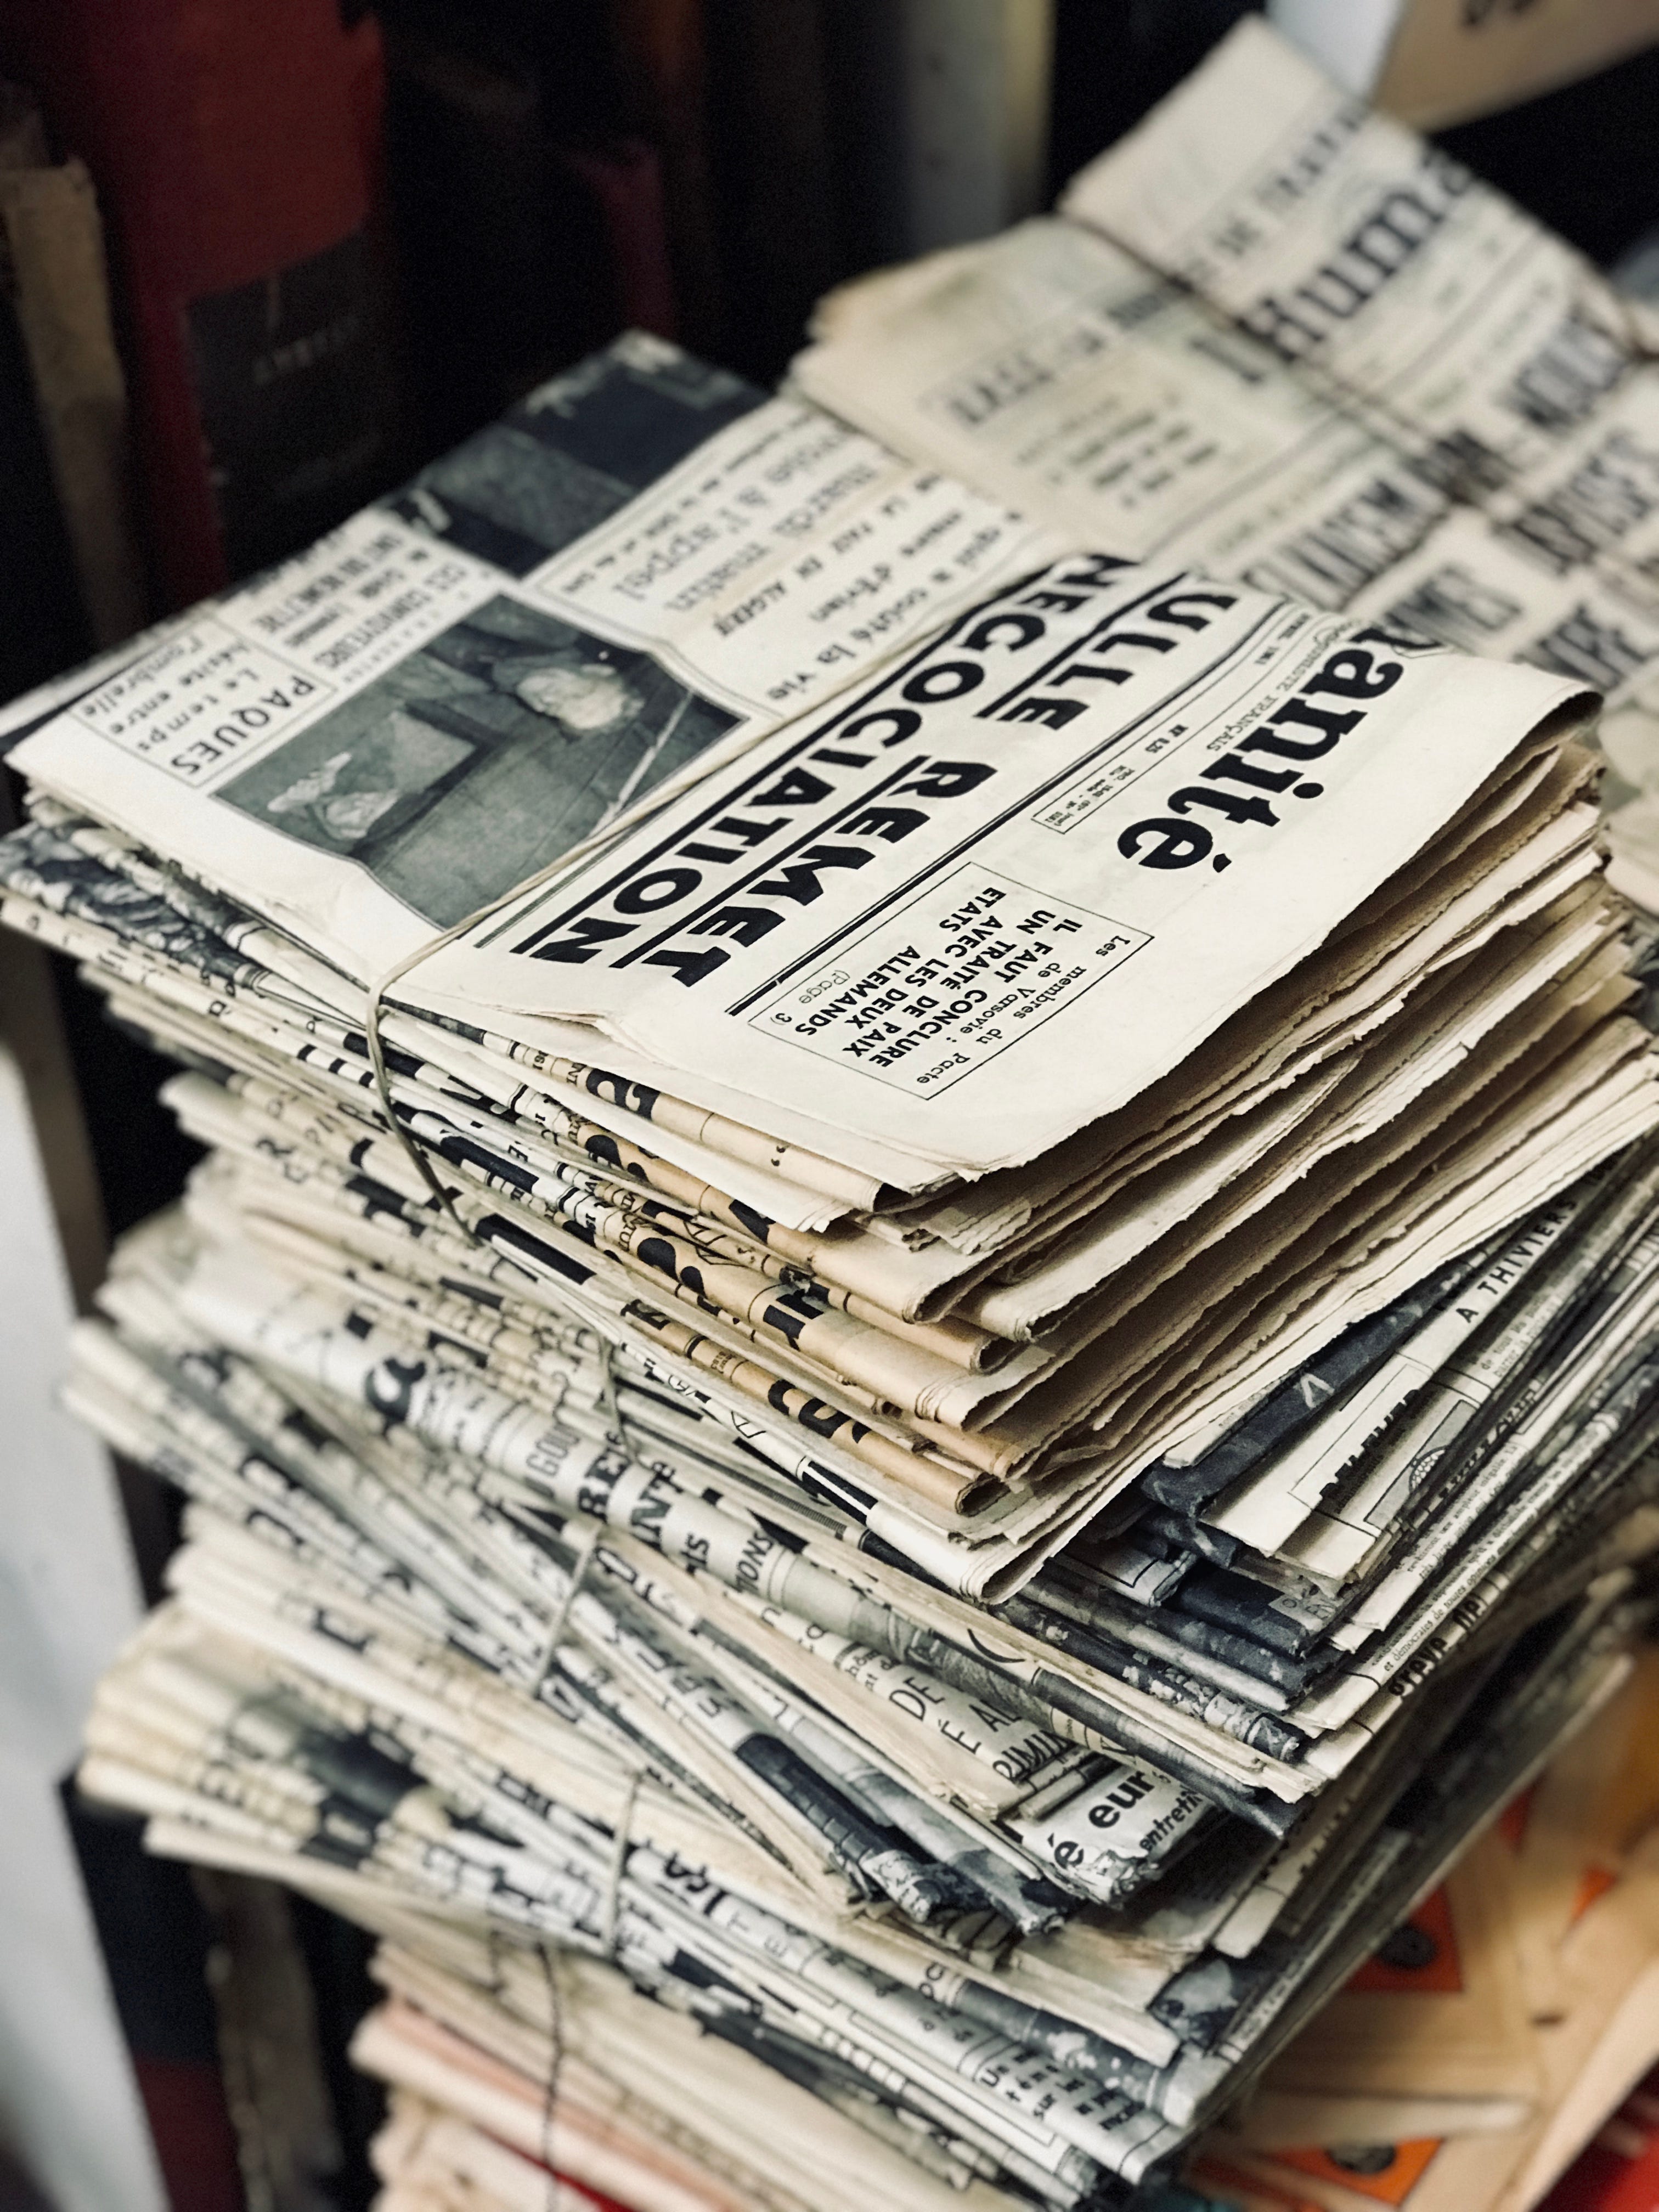 The Death of the Newspaper Industry | by John W Hayes | Medium